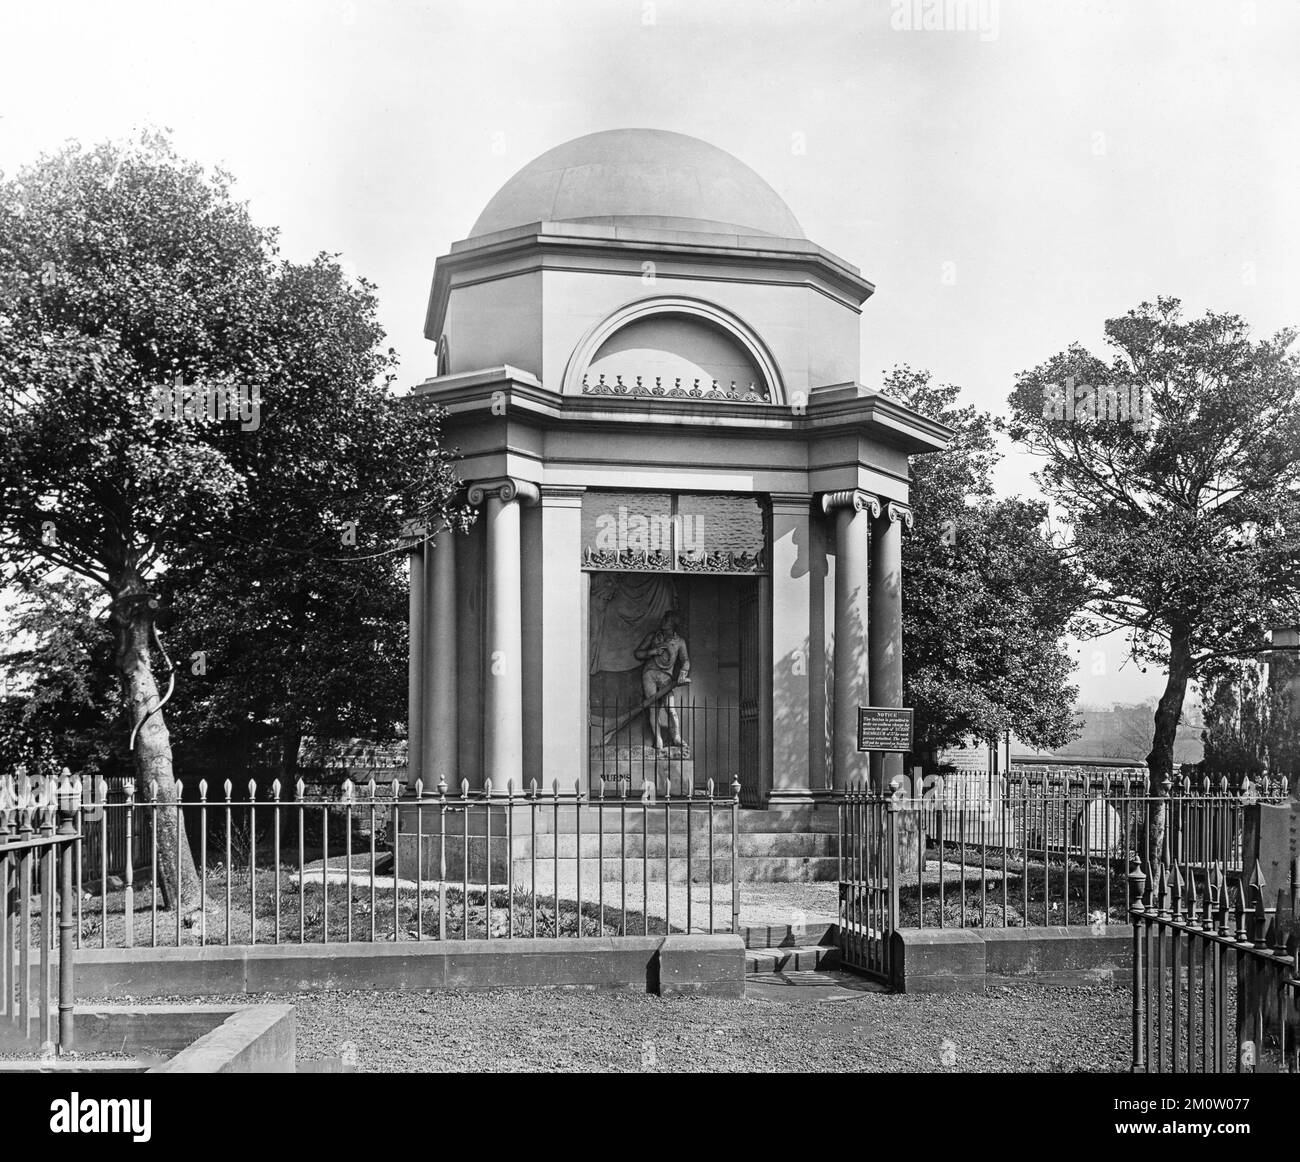 A late 19th century vintage black and white photograph showing the Robert Burns Mausoleum in St. Michael's Churchyard in Dumfries, Scotland. Stock Photo